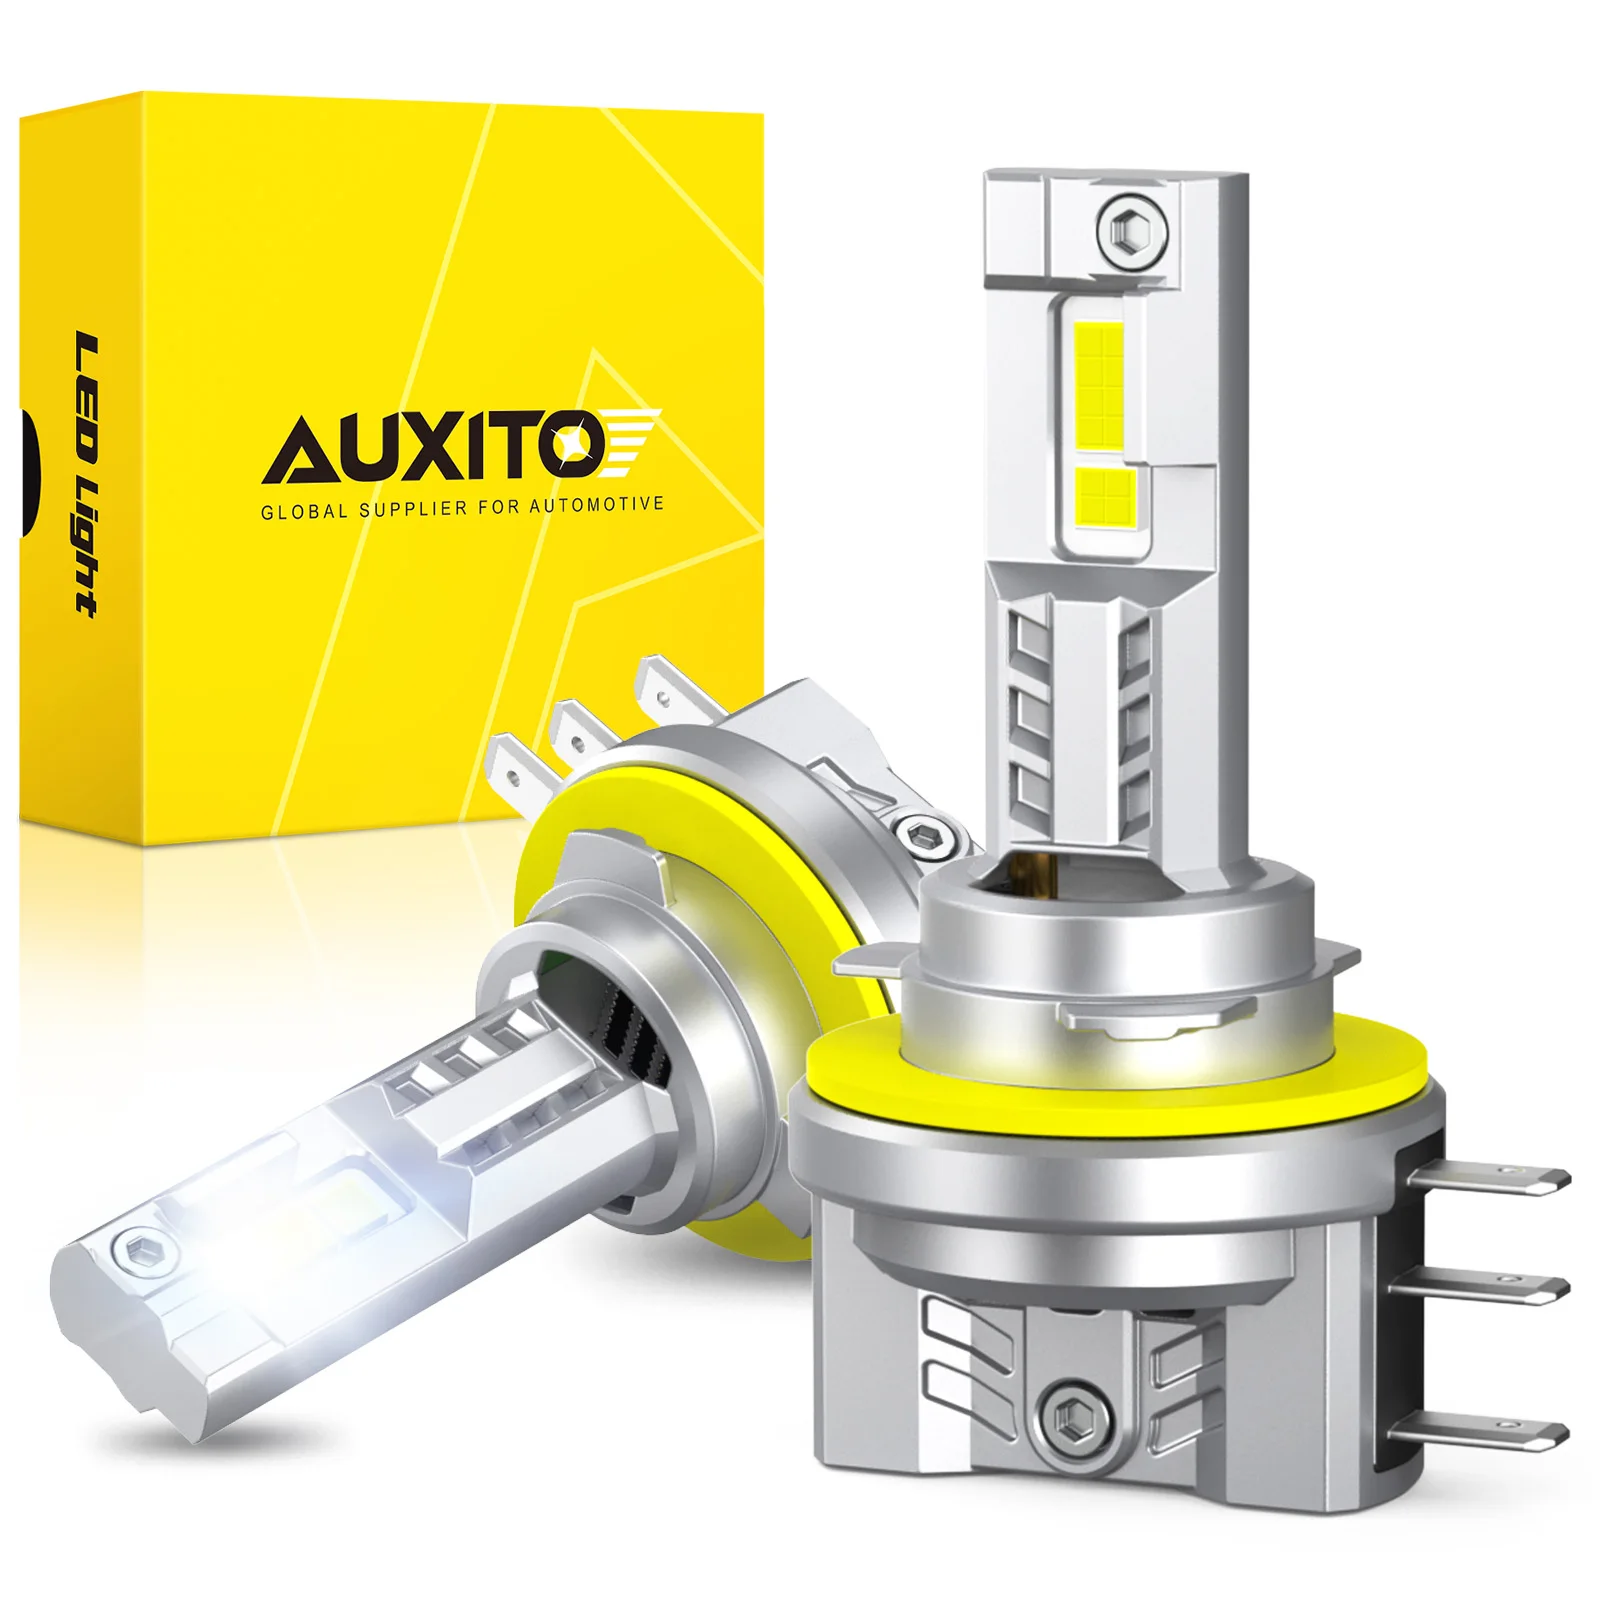 

AUXITO H15 LED Canbus Headlight High Low Beam 30000LM 60W H15 LED Bulb DRL for VW golf 7 MK6 Skoda BMW Mercedes Ford Mazda CX5